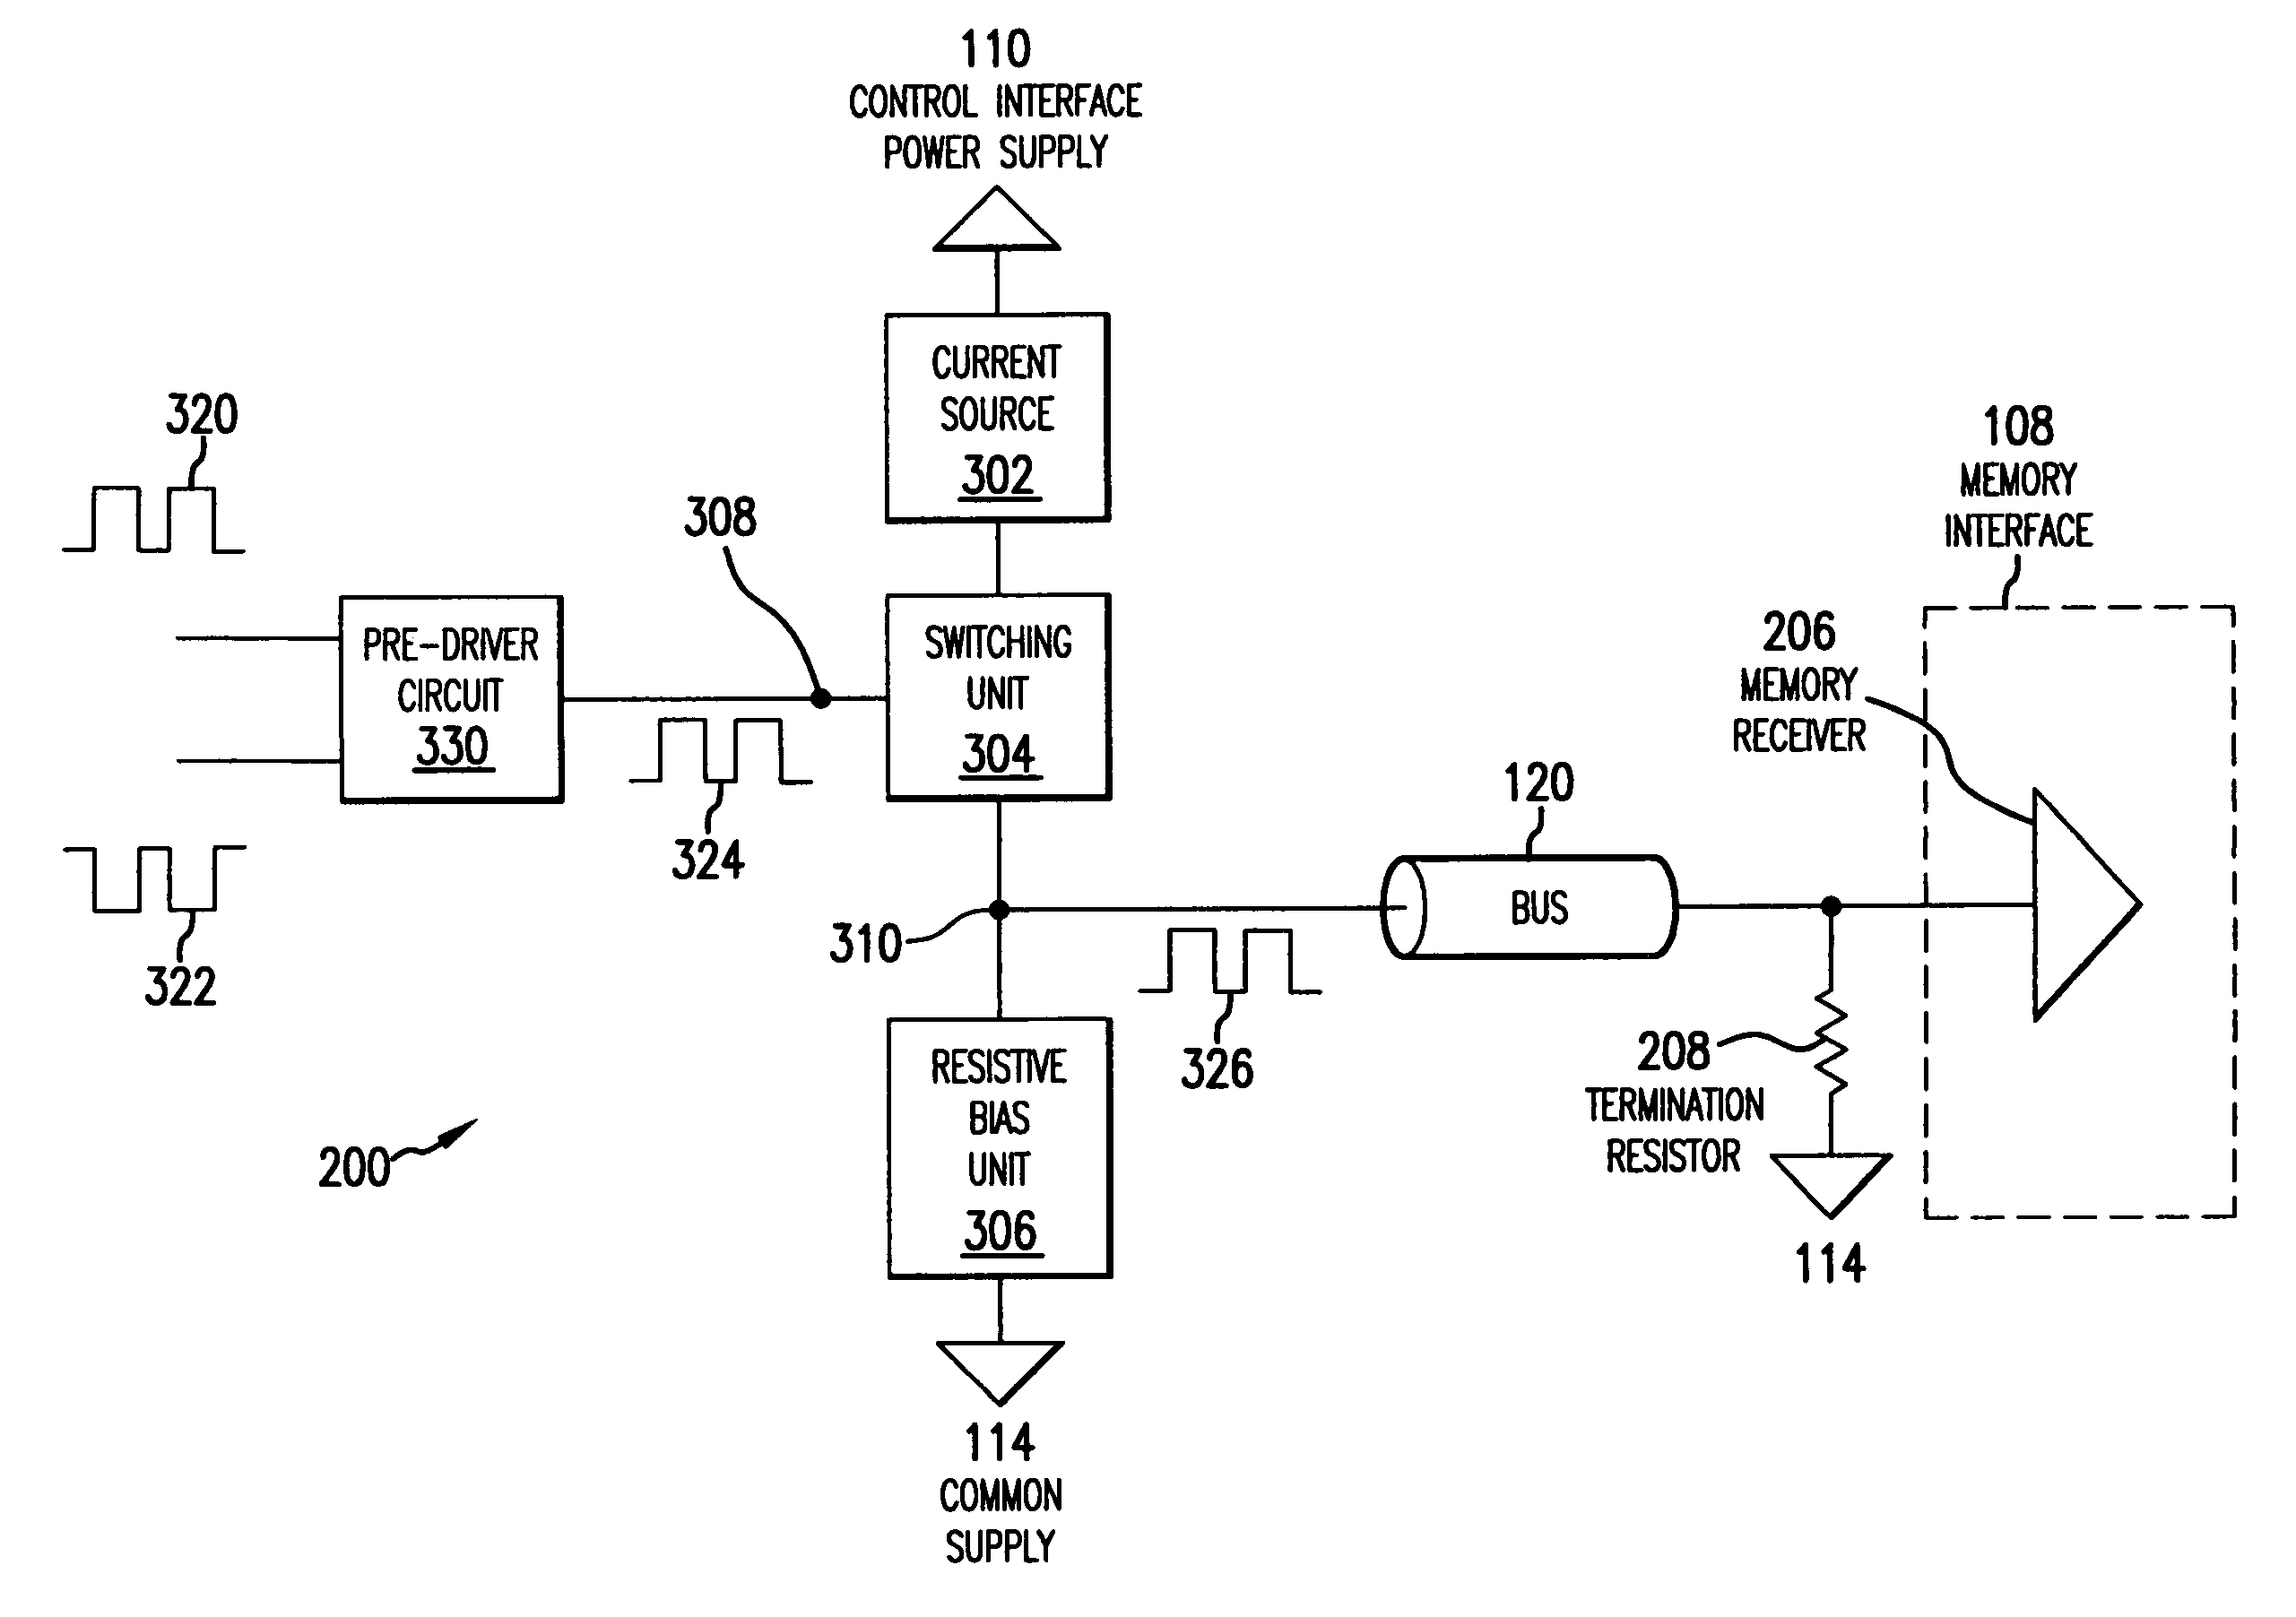 Single-ended memory interface system